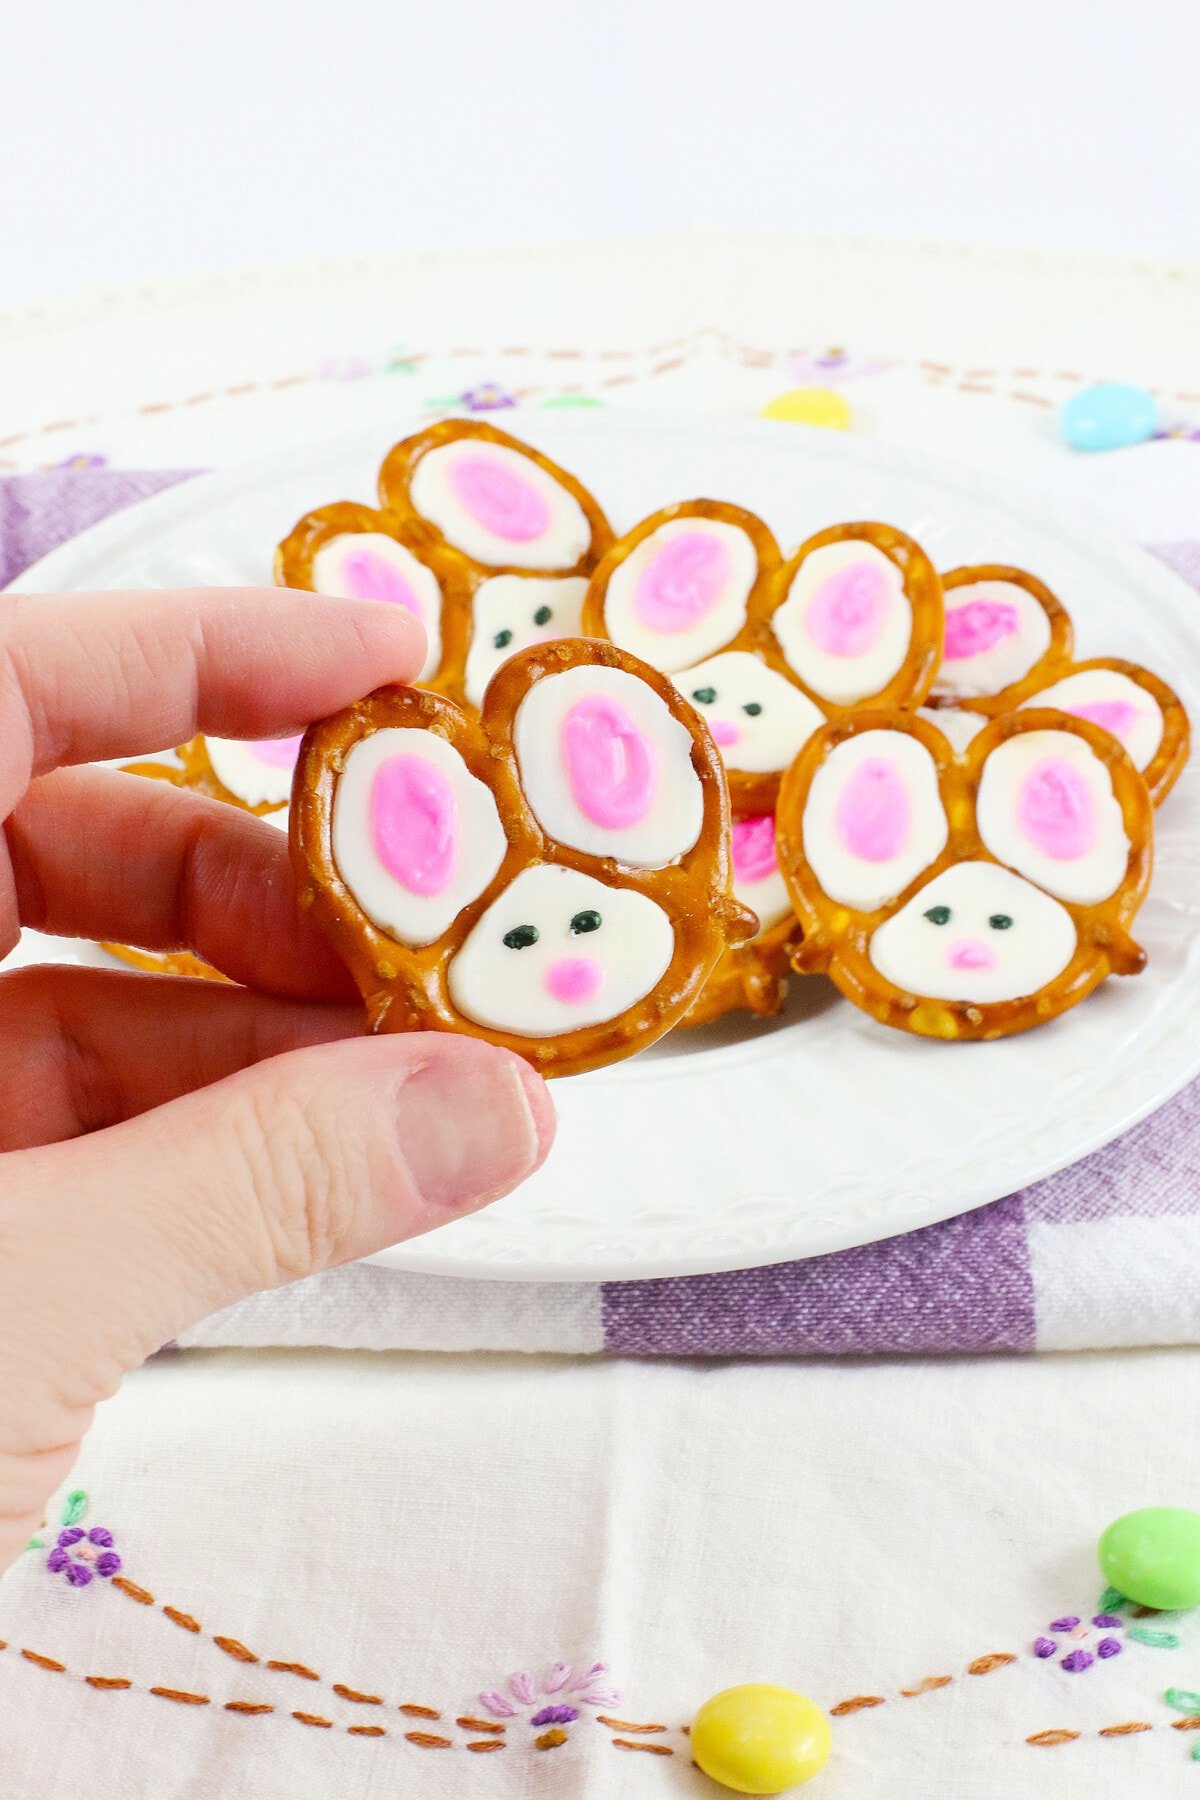 A hand holding the Bunny Pretzels.